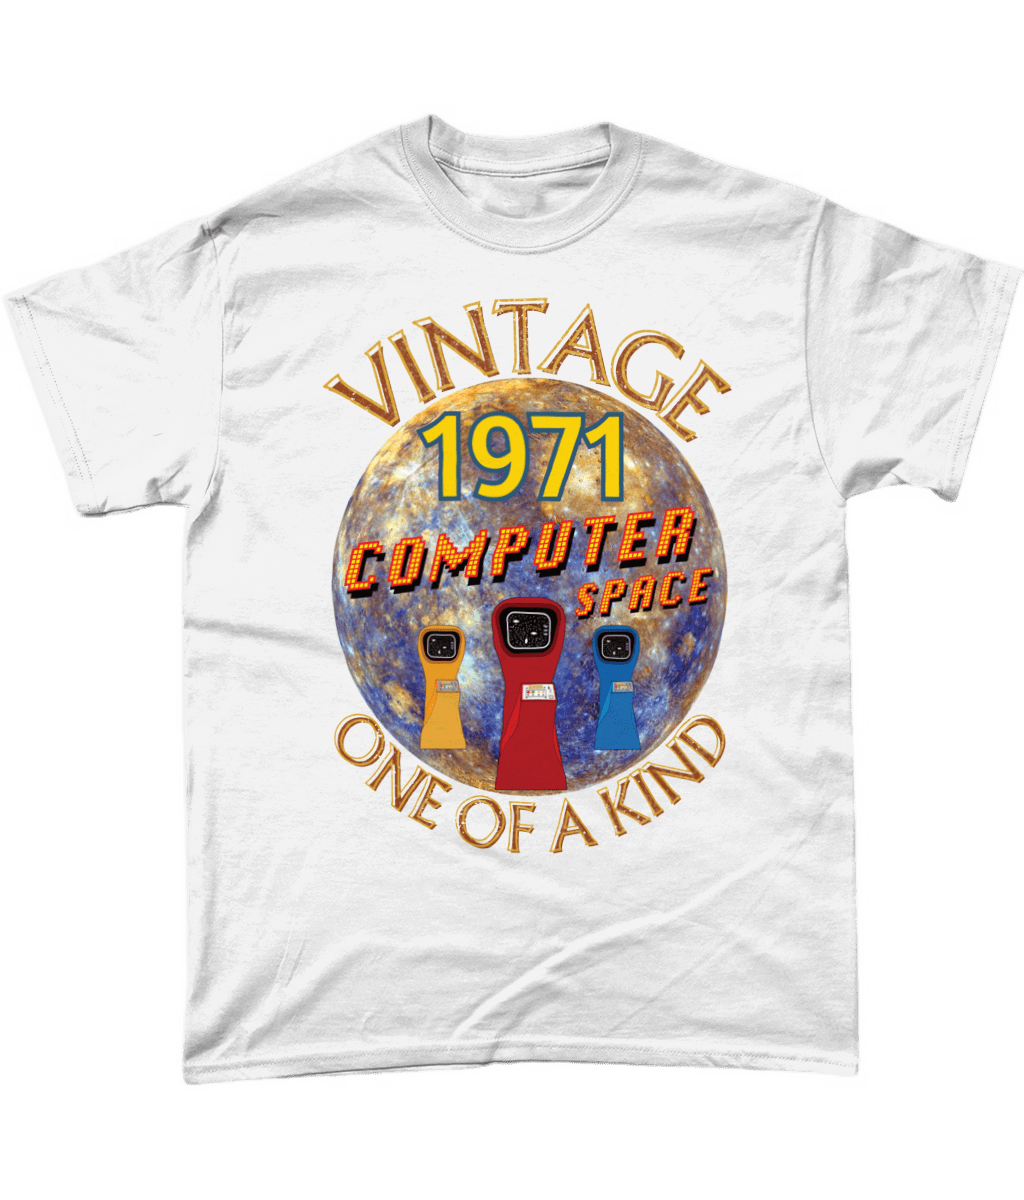 White T-Shirt with the words vintage,1971,computer space,one of a kind,large earth, 3 computer space arcade machines